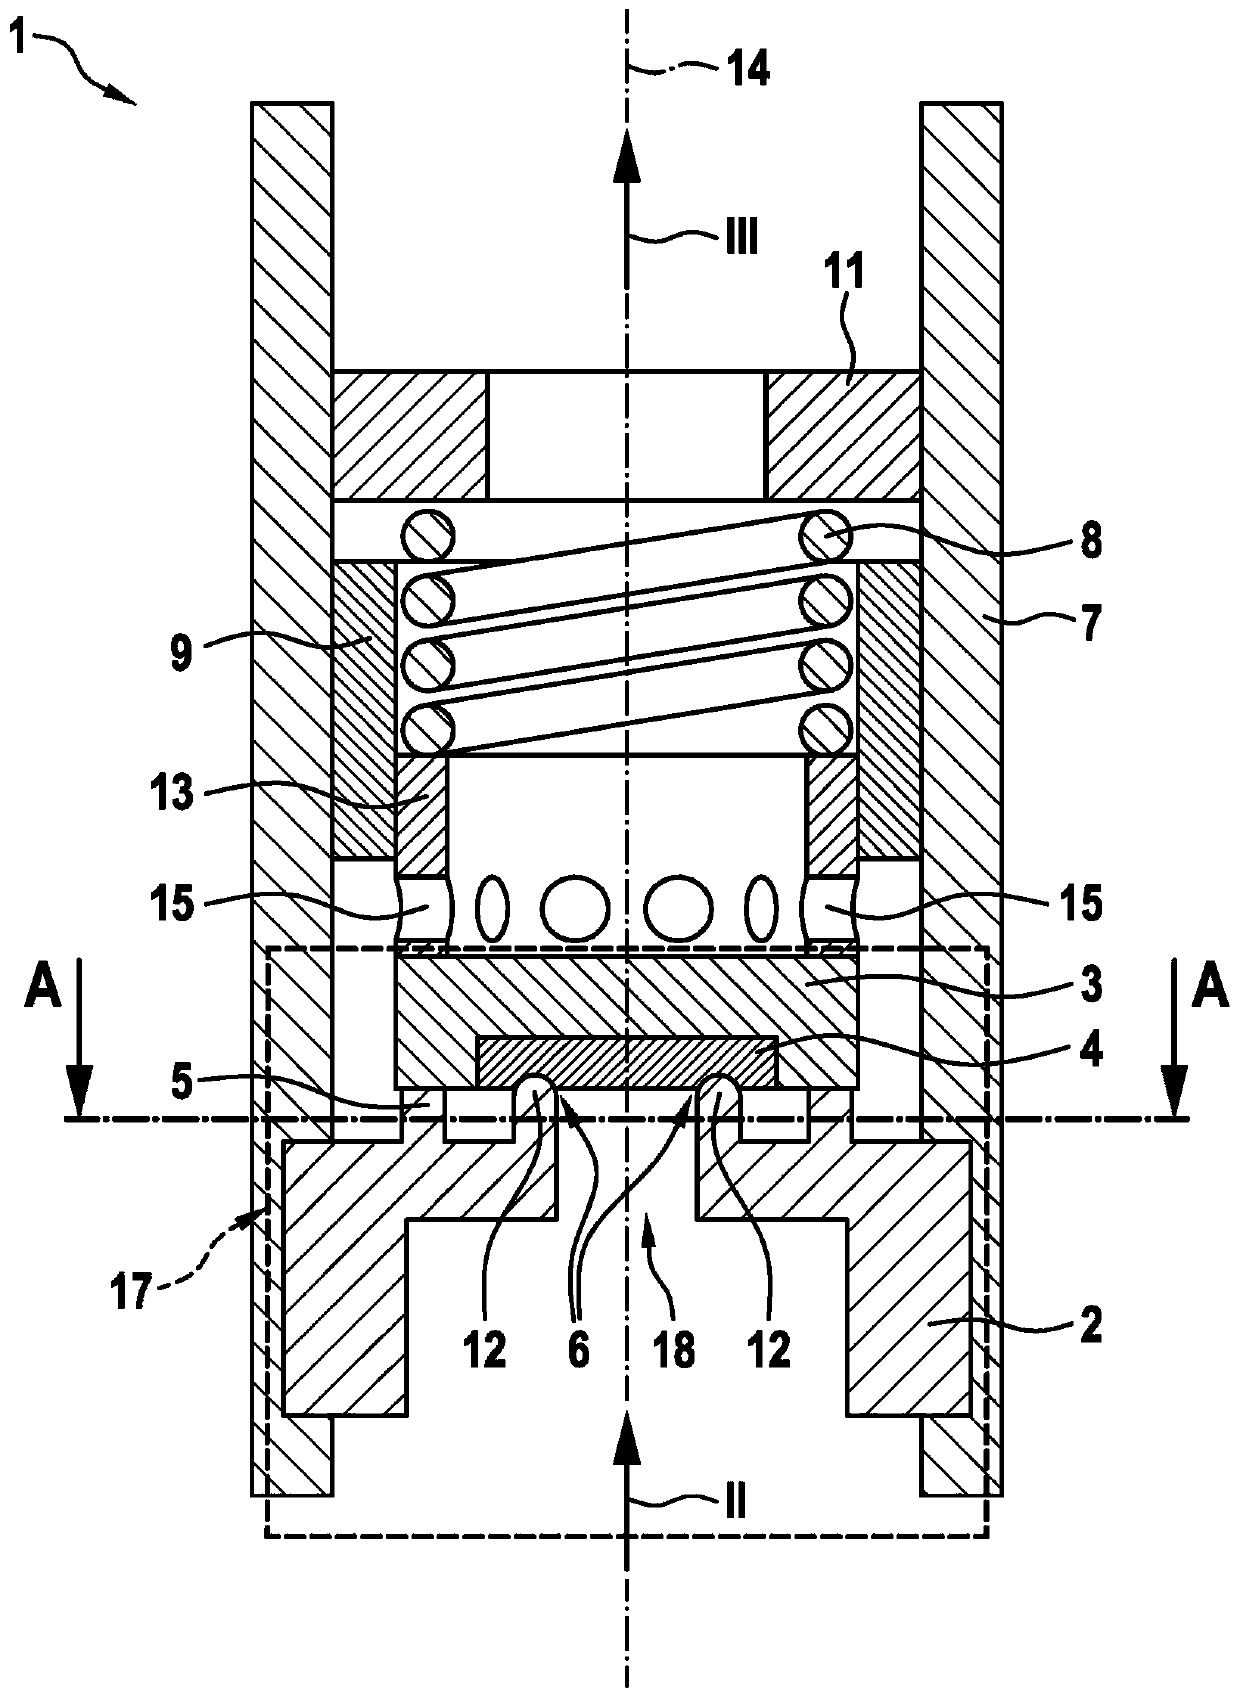 Gas pressure limiting valve for controlling and discharging a gaseous medium